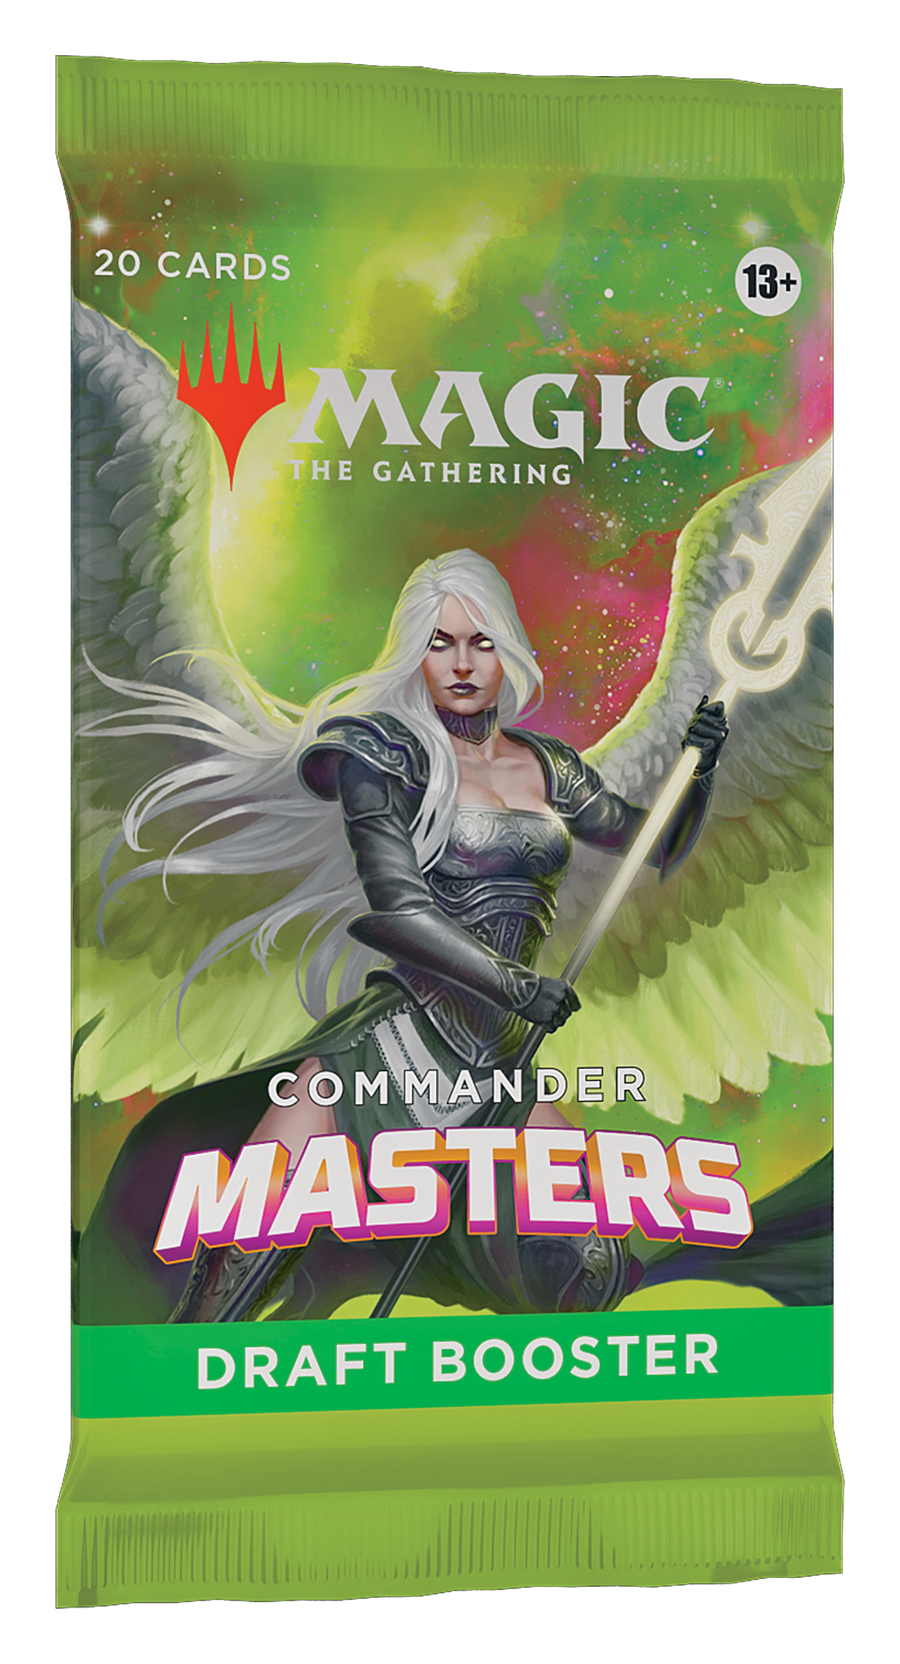 Magic: the Gathering - Commander Masters Draft Booster